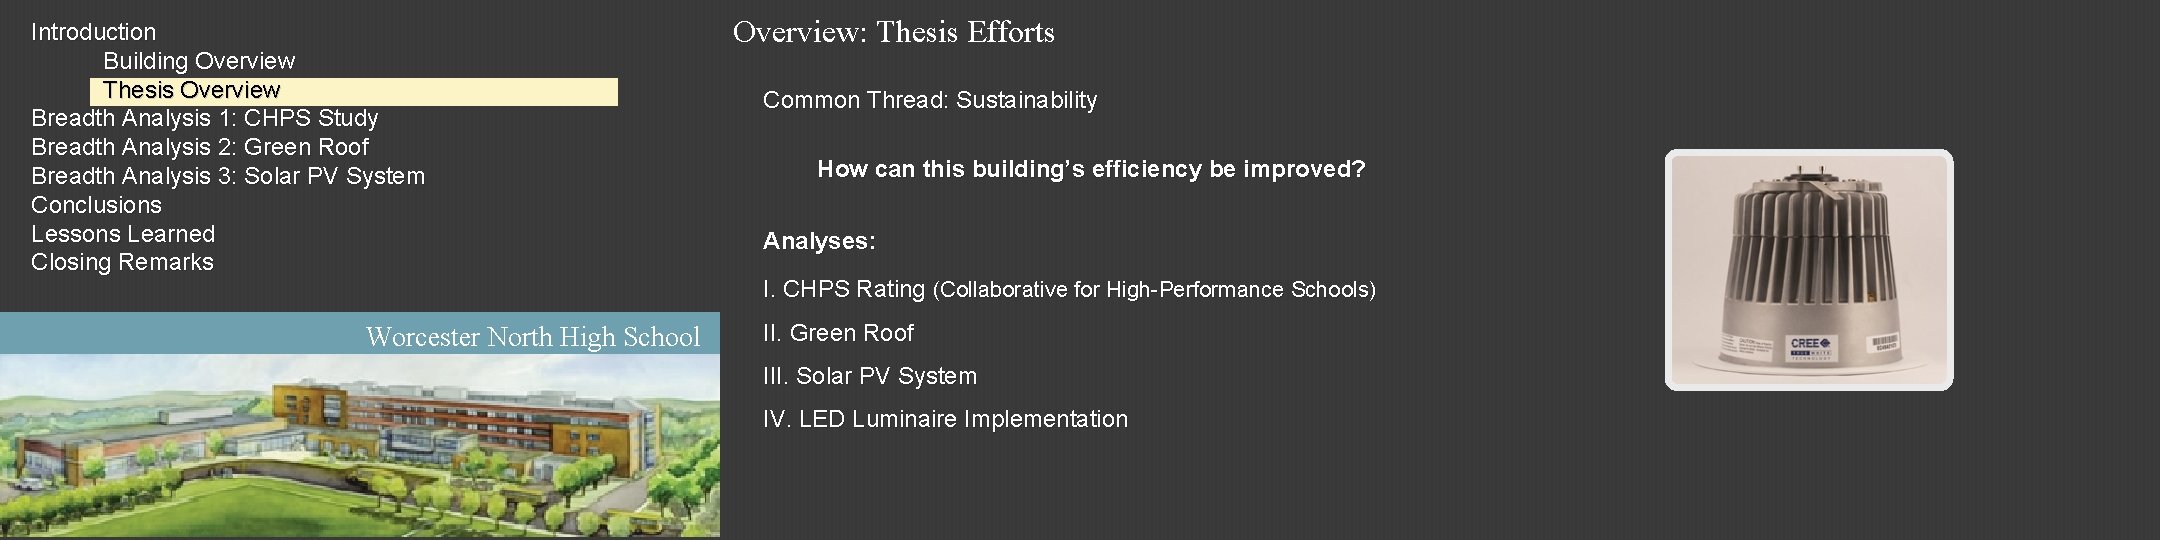 Introduction Building Overview Thesis Overview Breadth Analysis 1: CHPS Study Breadth Analysis 2: Green